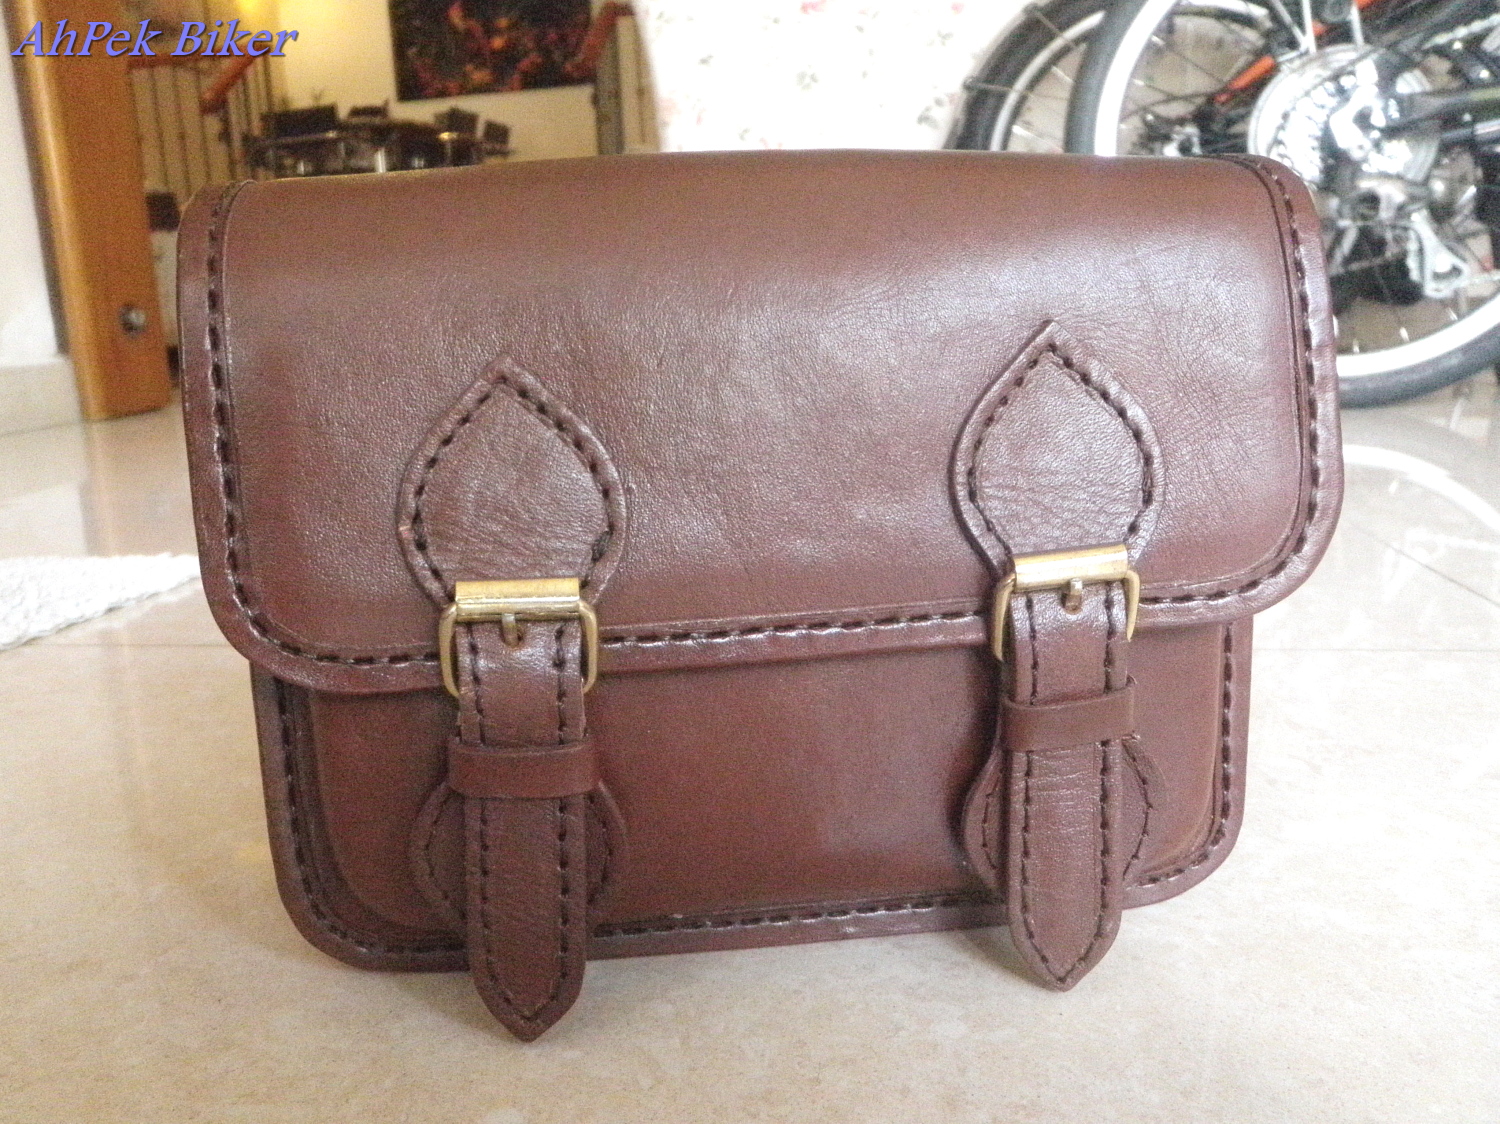 AhPek Biker - Old Dog Rides Again: Brompton Accessories #5 - Leather Pouch